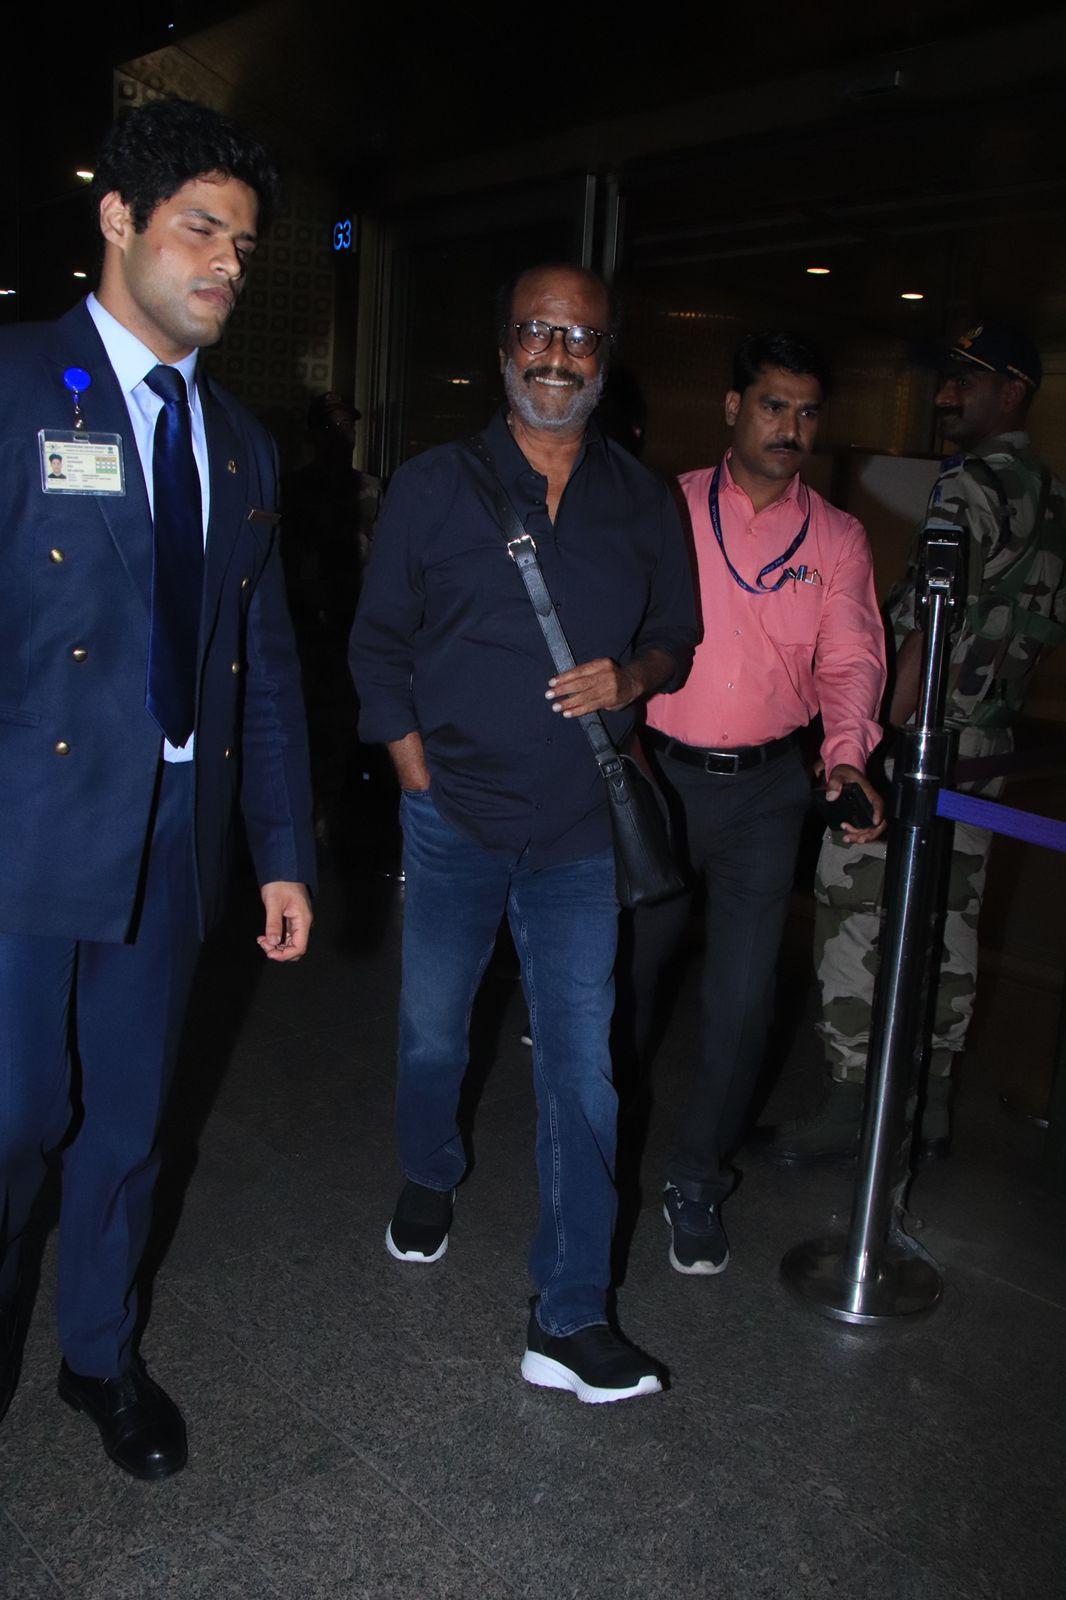 Rajinikanth was snapped at the Mumbai airport ahead of the India vs NZ sem-finale